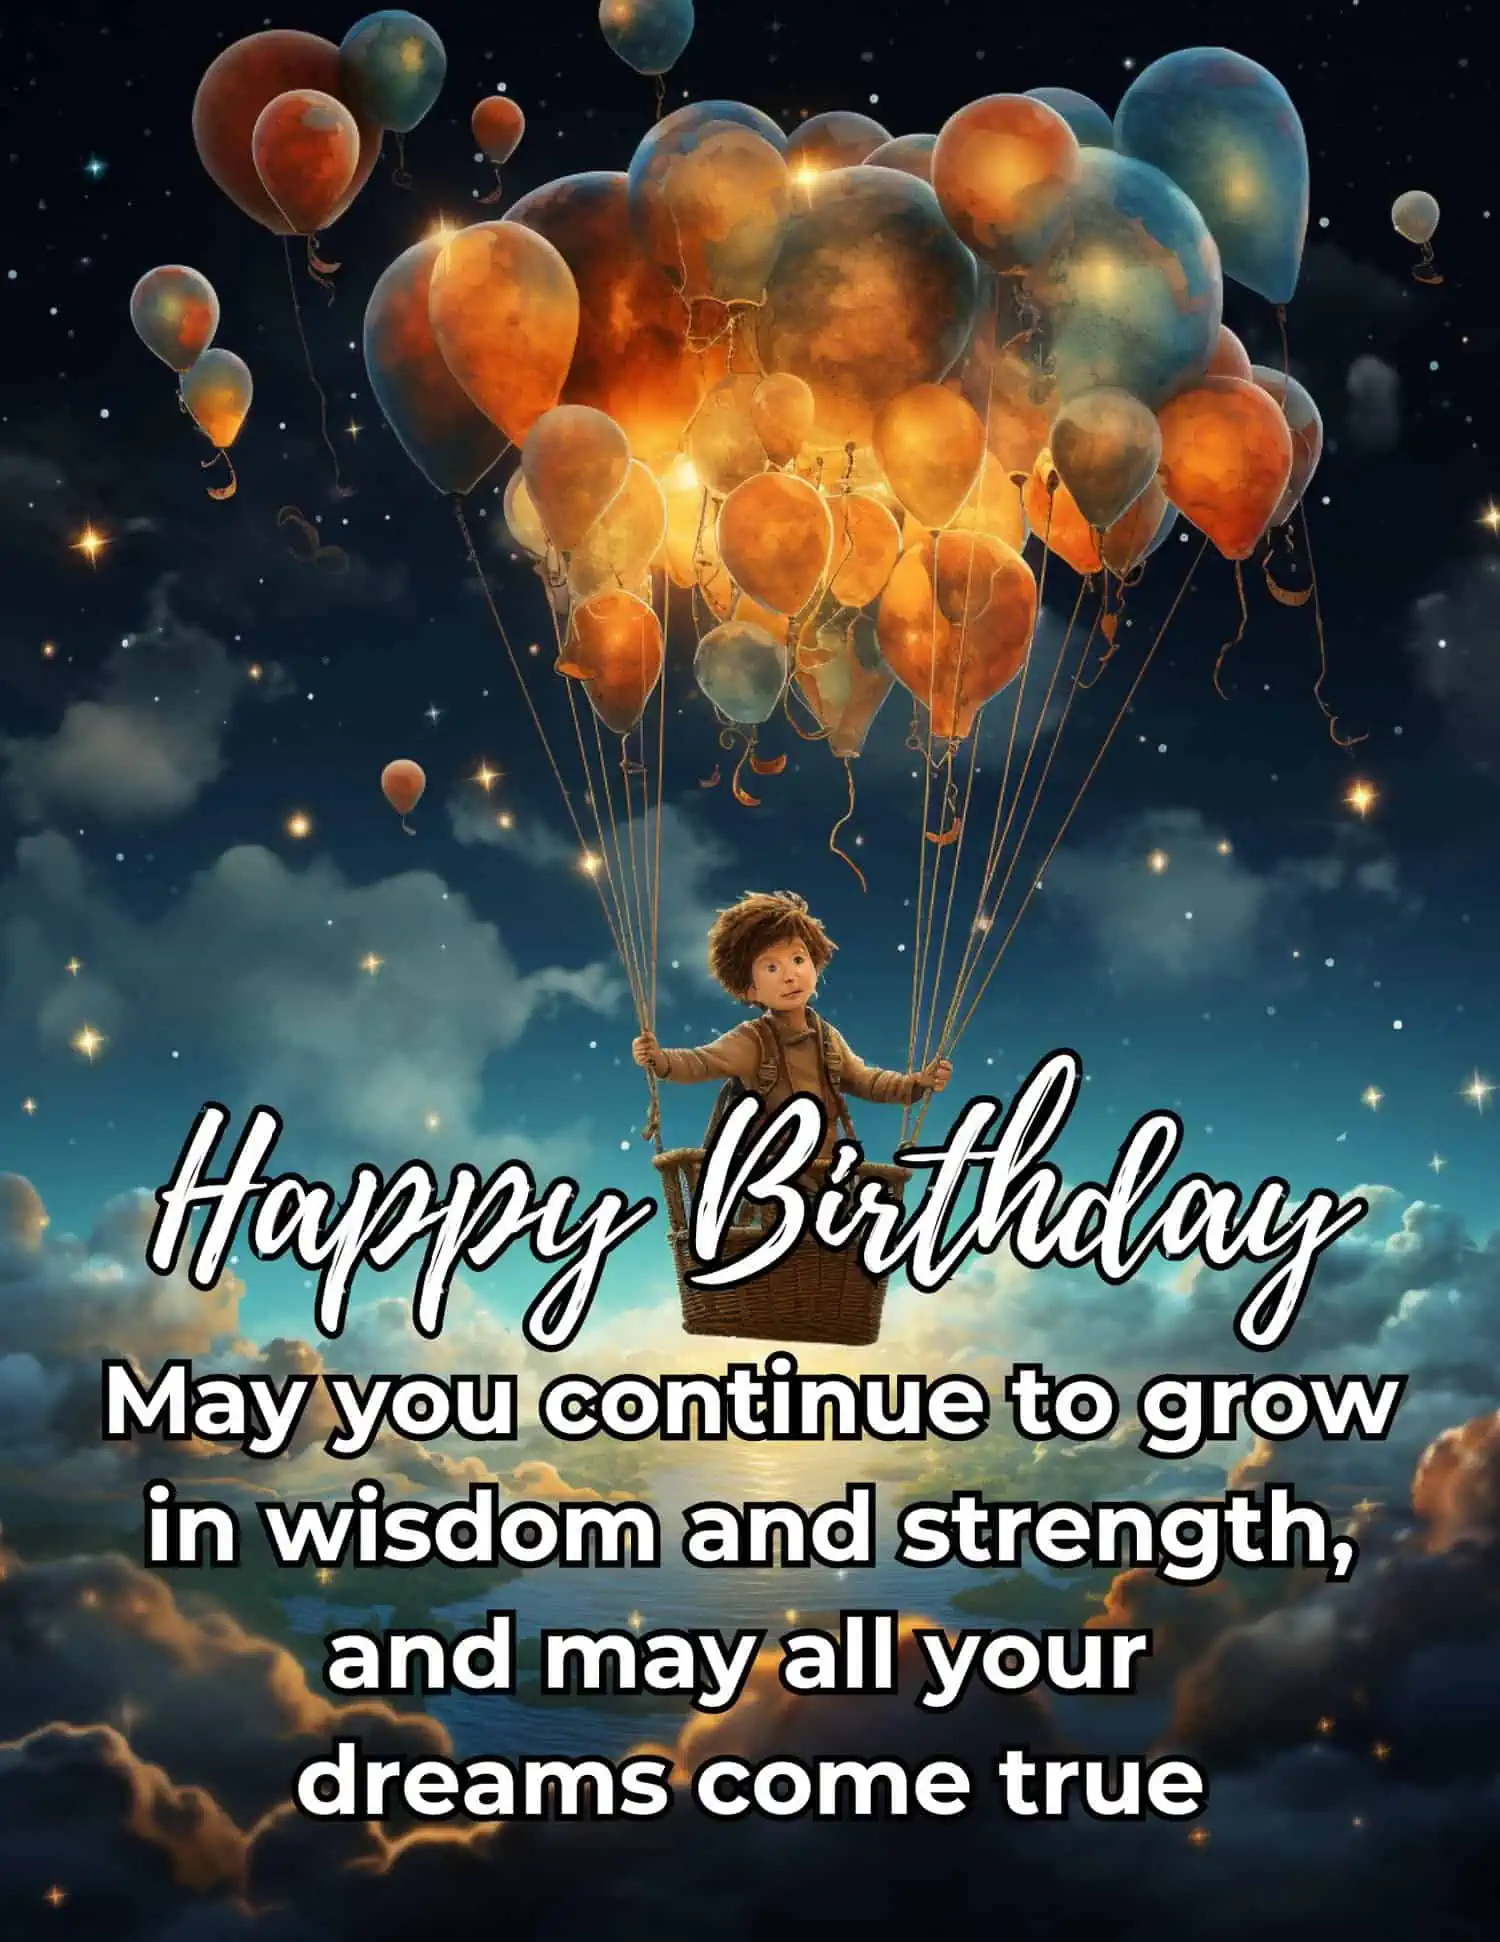 A collection of heartfelt prayers and blessings dedicated to a son on his birthday, reflecting love, hope, and the best wishes for his future.